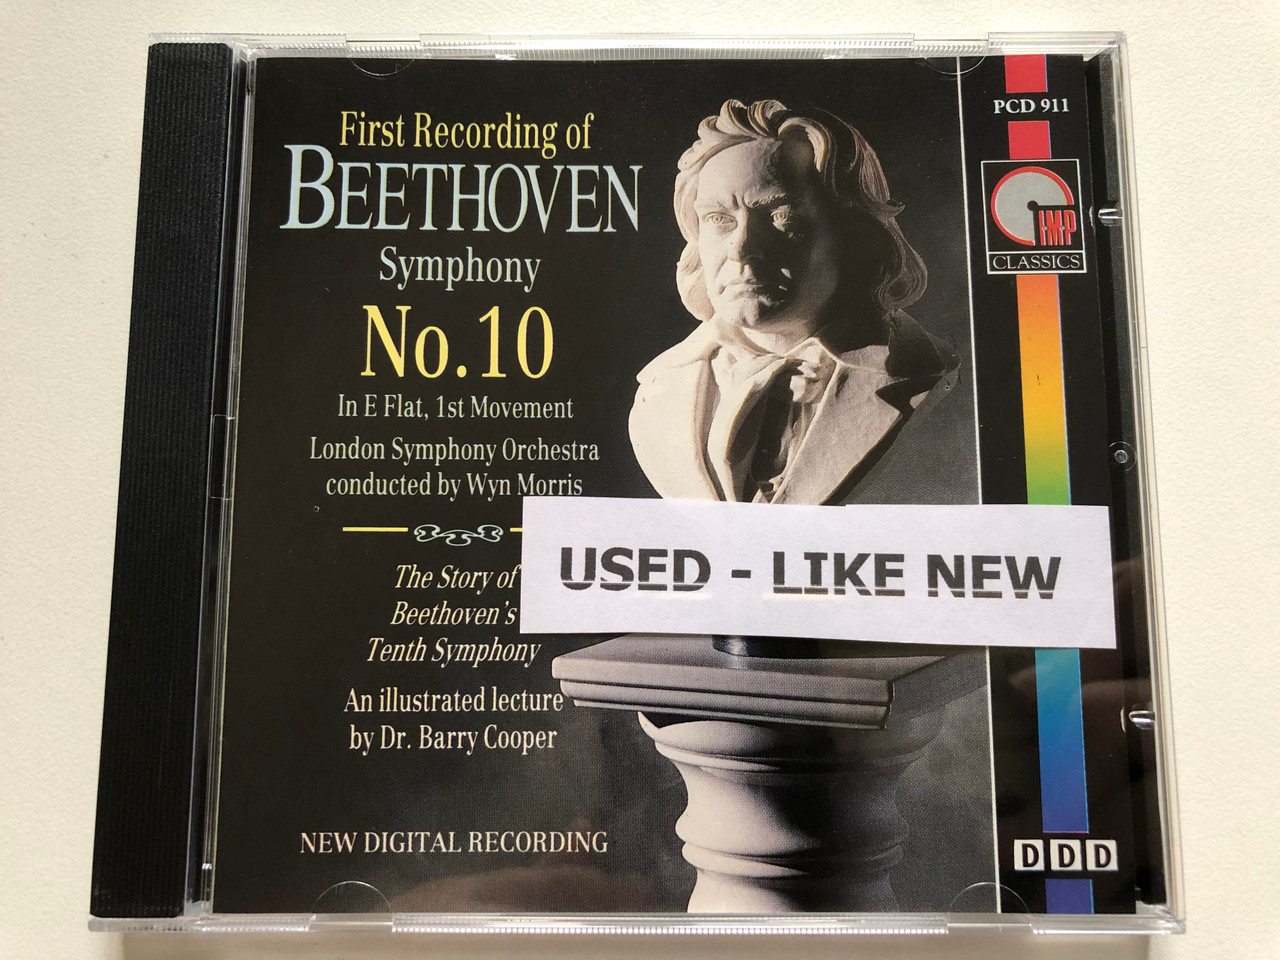 https://cdn10.bigcommerce.com/s-62bdpkt7pb/products/0/images/306642/First_Recording_Of_Beethoven_Symphony_No._10_In_E_Flat_1st_Movement_-_London_Symphony_Orchestra_Conducted_By_Wyn_Morris_The_Story_of_Beethovens_Tenth_Symphony._An_illustrated_lecture_by_6__71784.1698329297.1280.1280.JPG?c=2